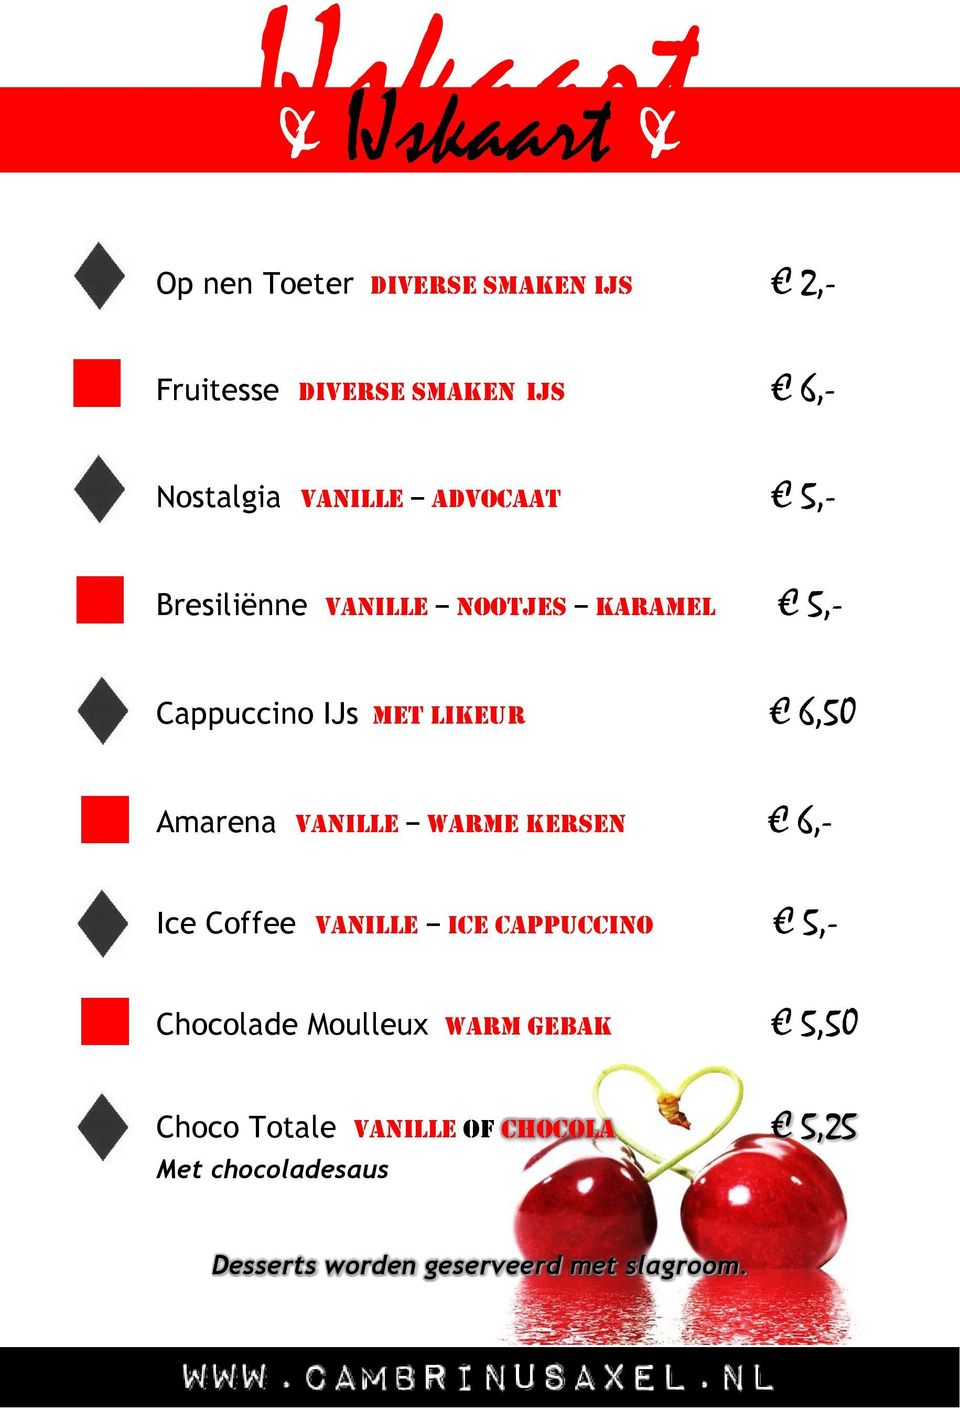 6,50 Amarena vanille warme kersen 6,- Ice Coffee vanille ice cappuccino 5,- d Chocolade Moulleux